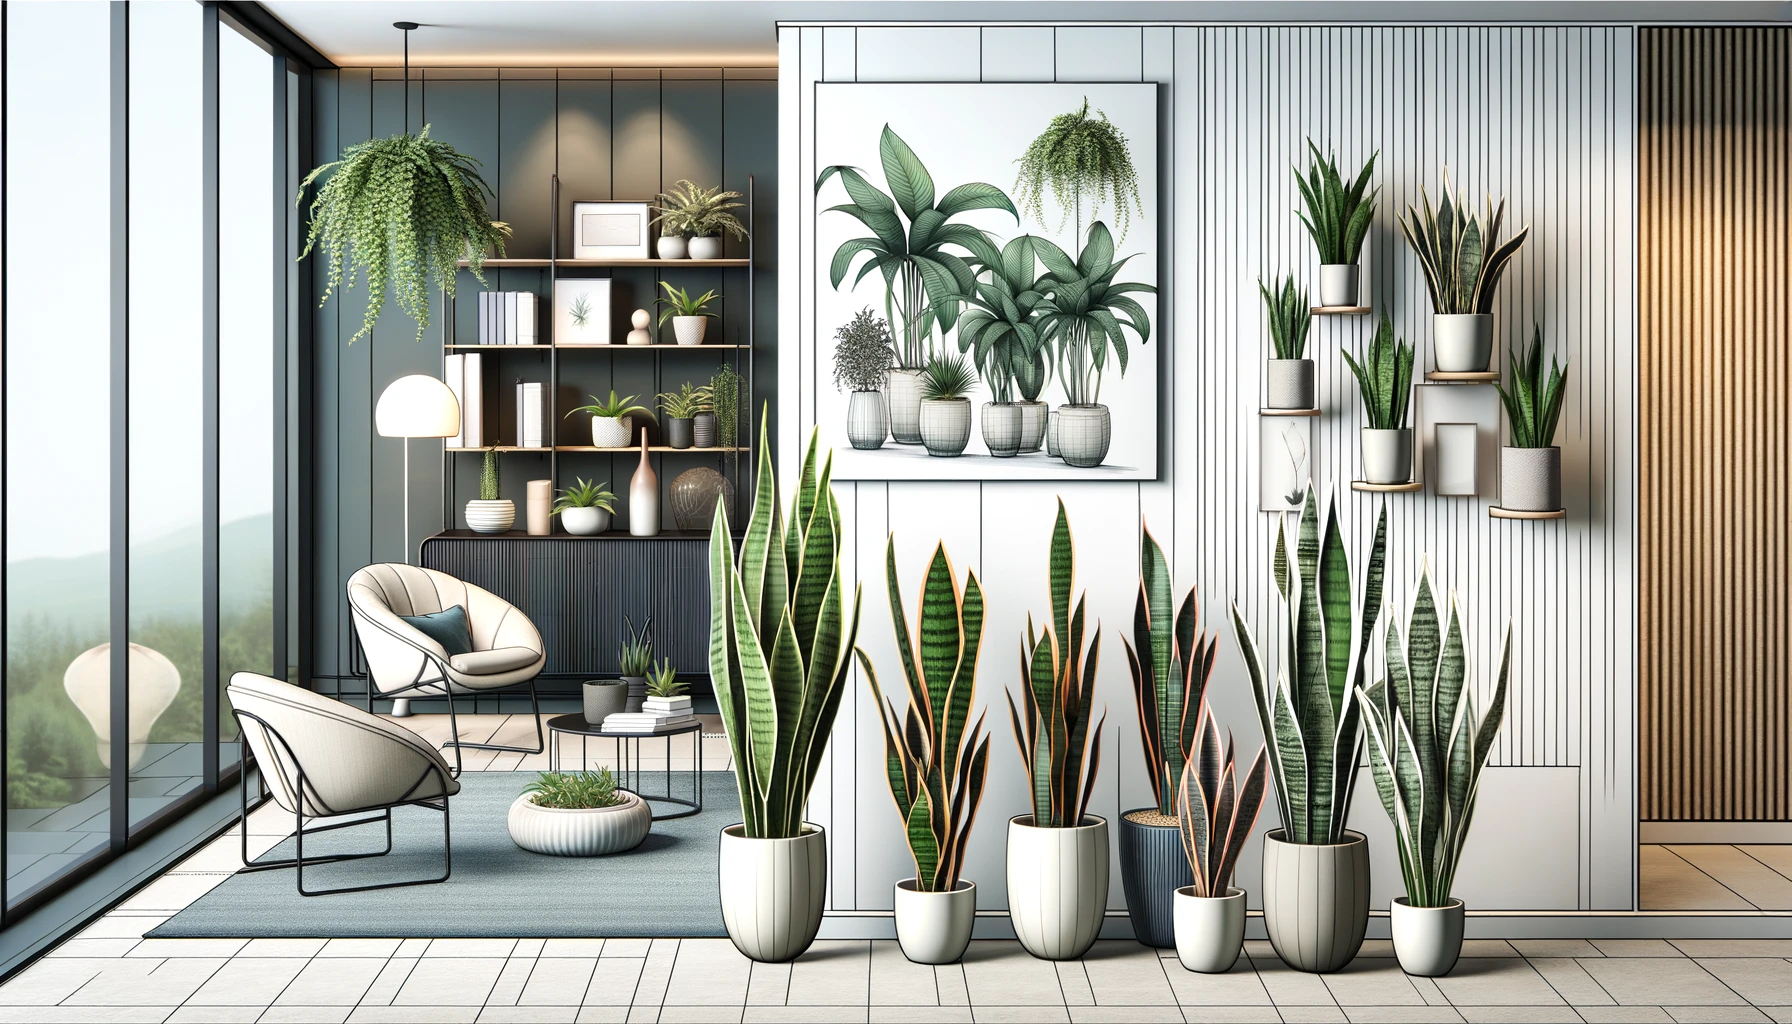 Elegant indoor display of diverse snake plant varieties including Dracaena trifasciata 'Laurentii', Dracaena cylindrica, and Dracaena masoniana (Whale Fin) in contemporary styled pots, arranged in a chic, well-lit room with modern decor and sleek furniture, emphasizing the unique leaf shapes and color patterns of each variety.